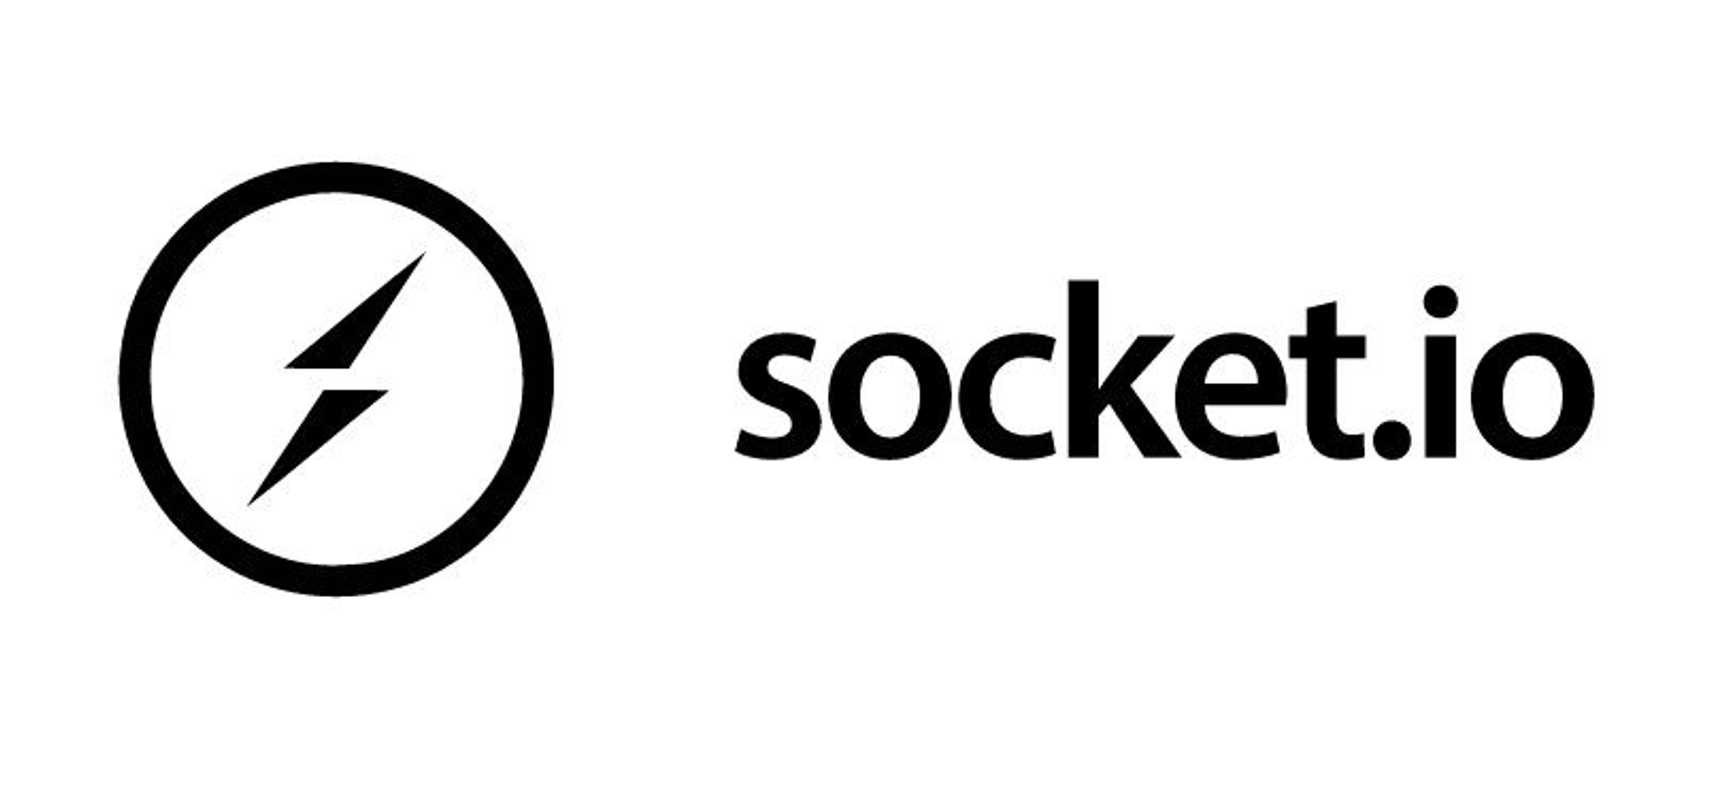 What’s new in SocketIO 4?